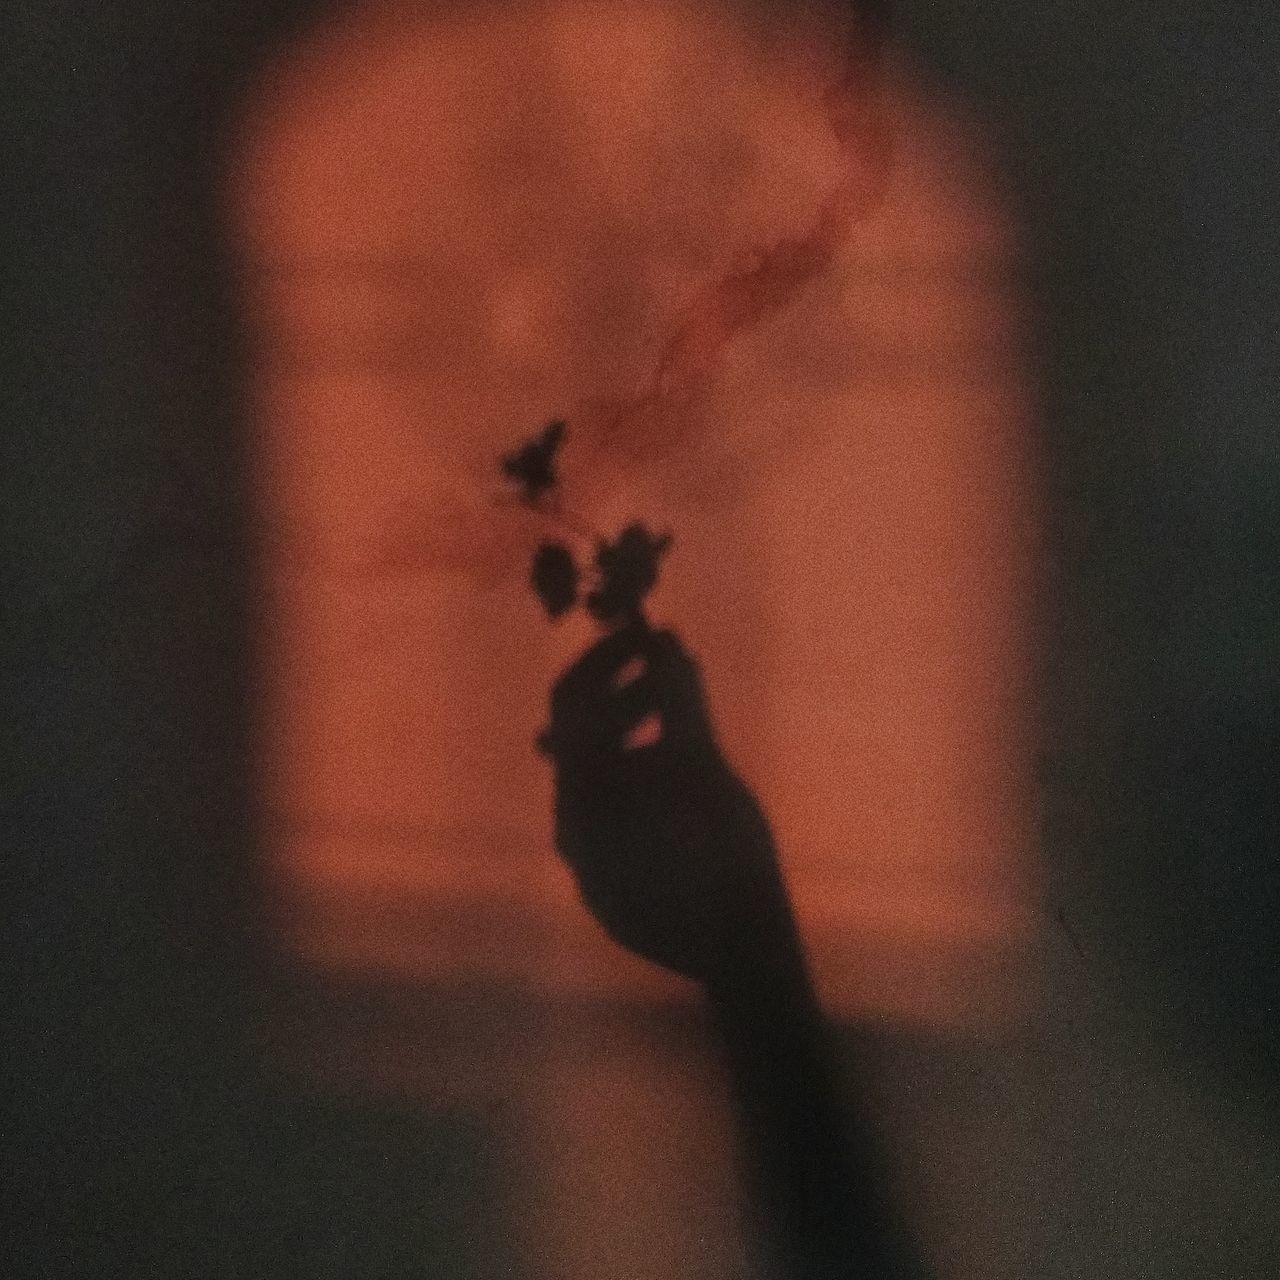 SHADOW OF PERSON HOLDING PLANT